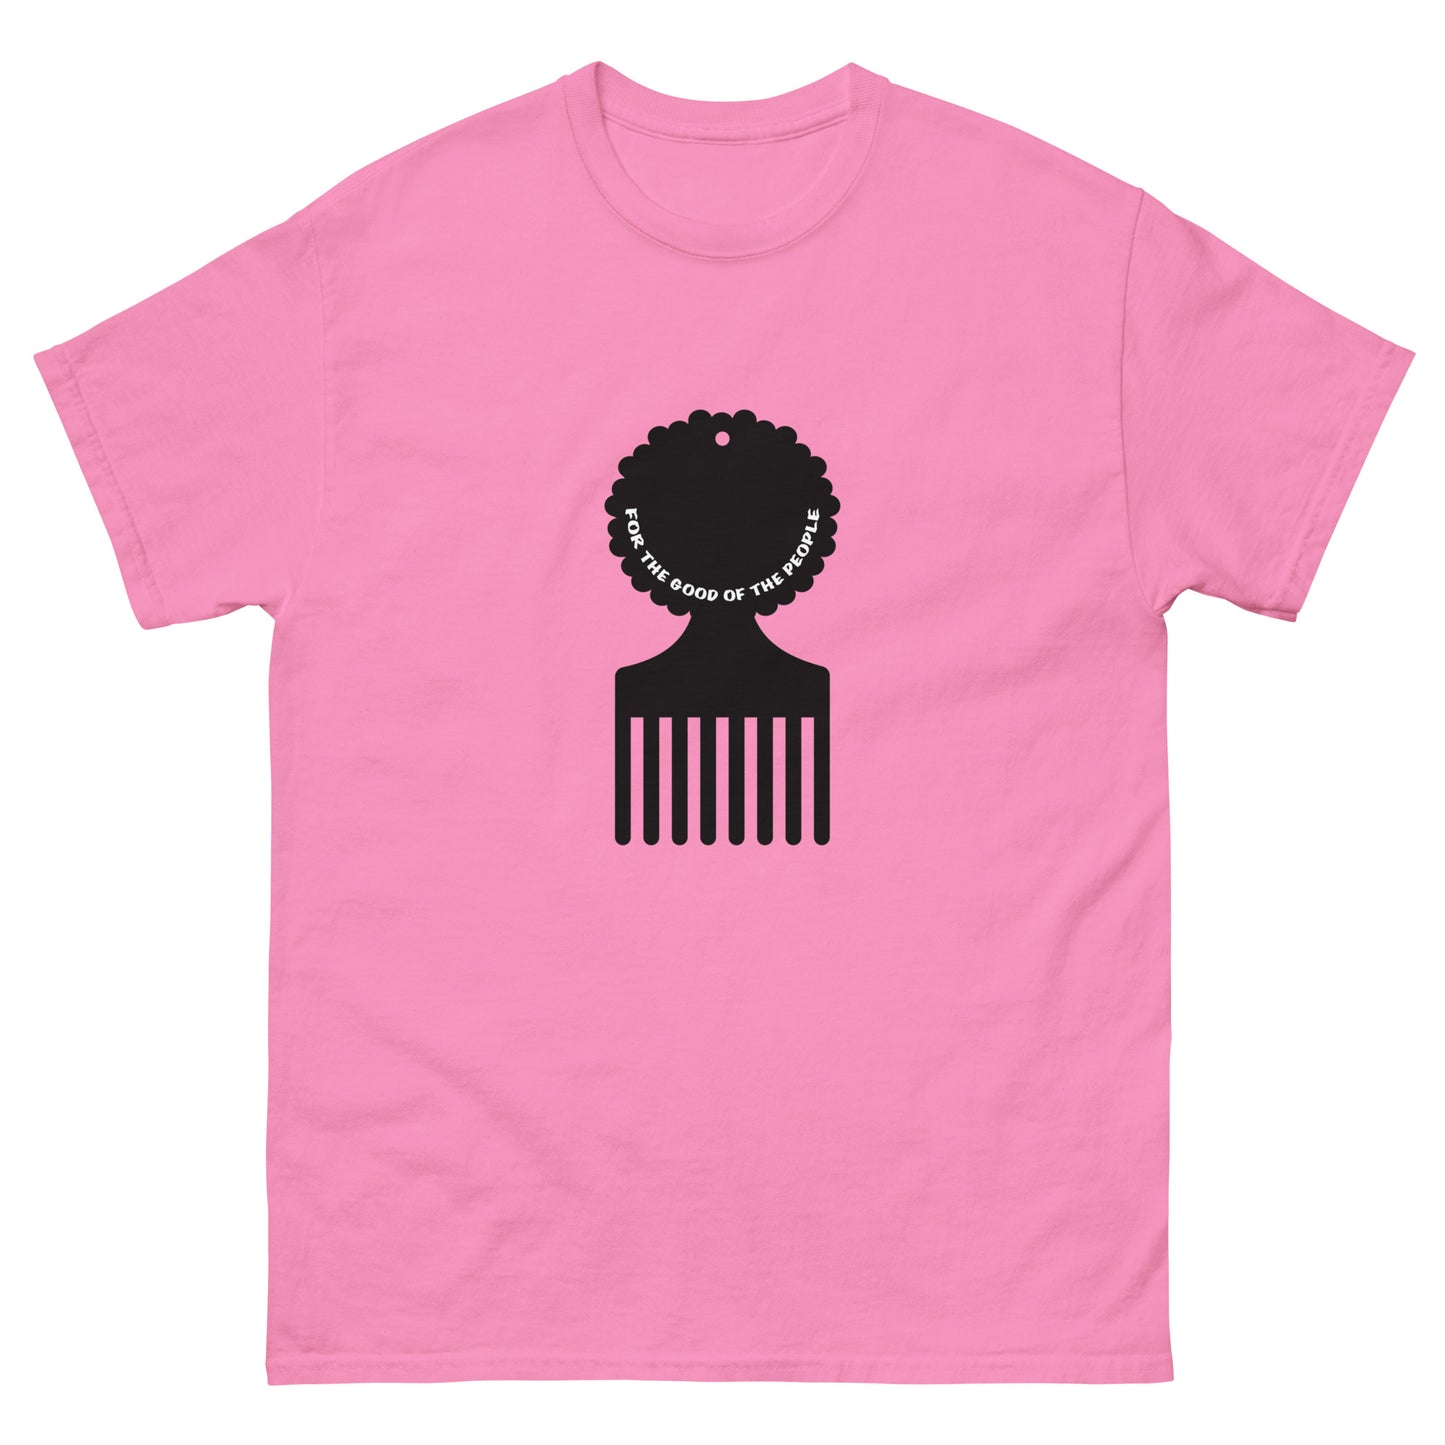 Men's azalea pink tee with black afro pick in the center of shirt, with for the good of the people in white inside the afro pick's handle.